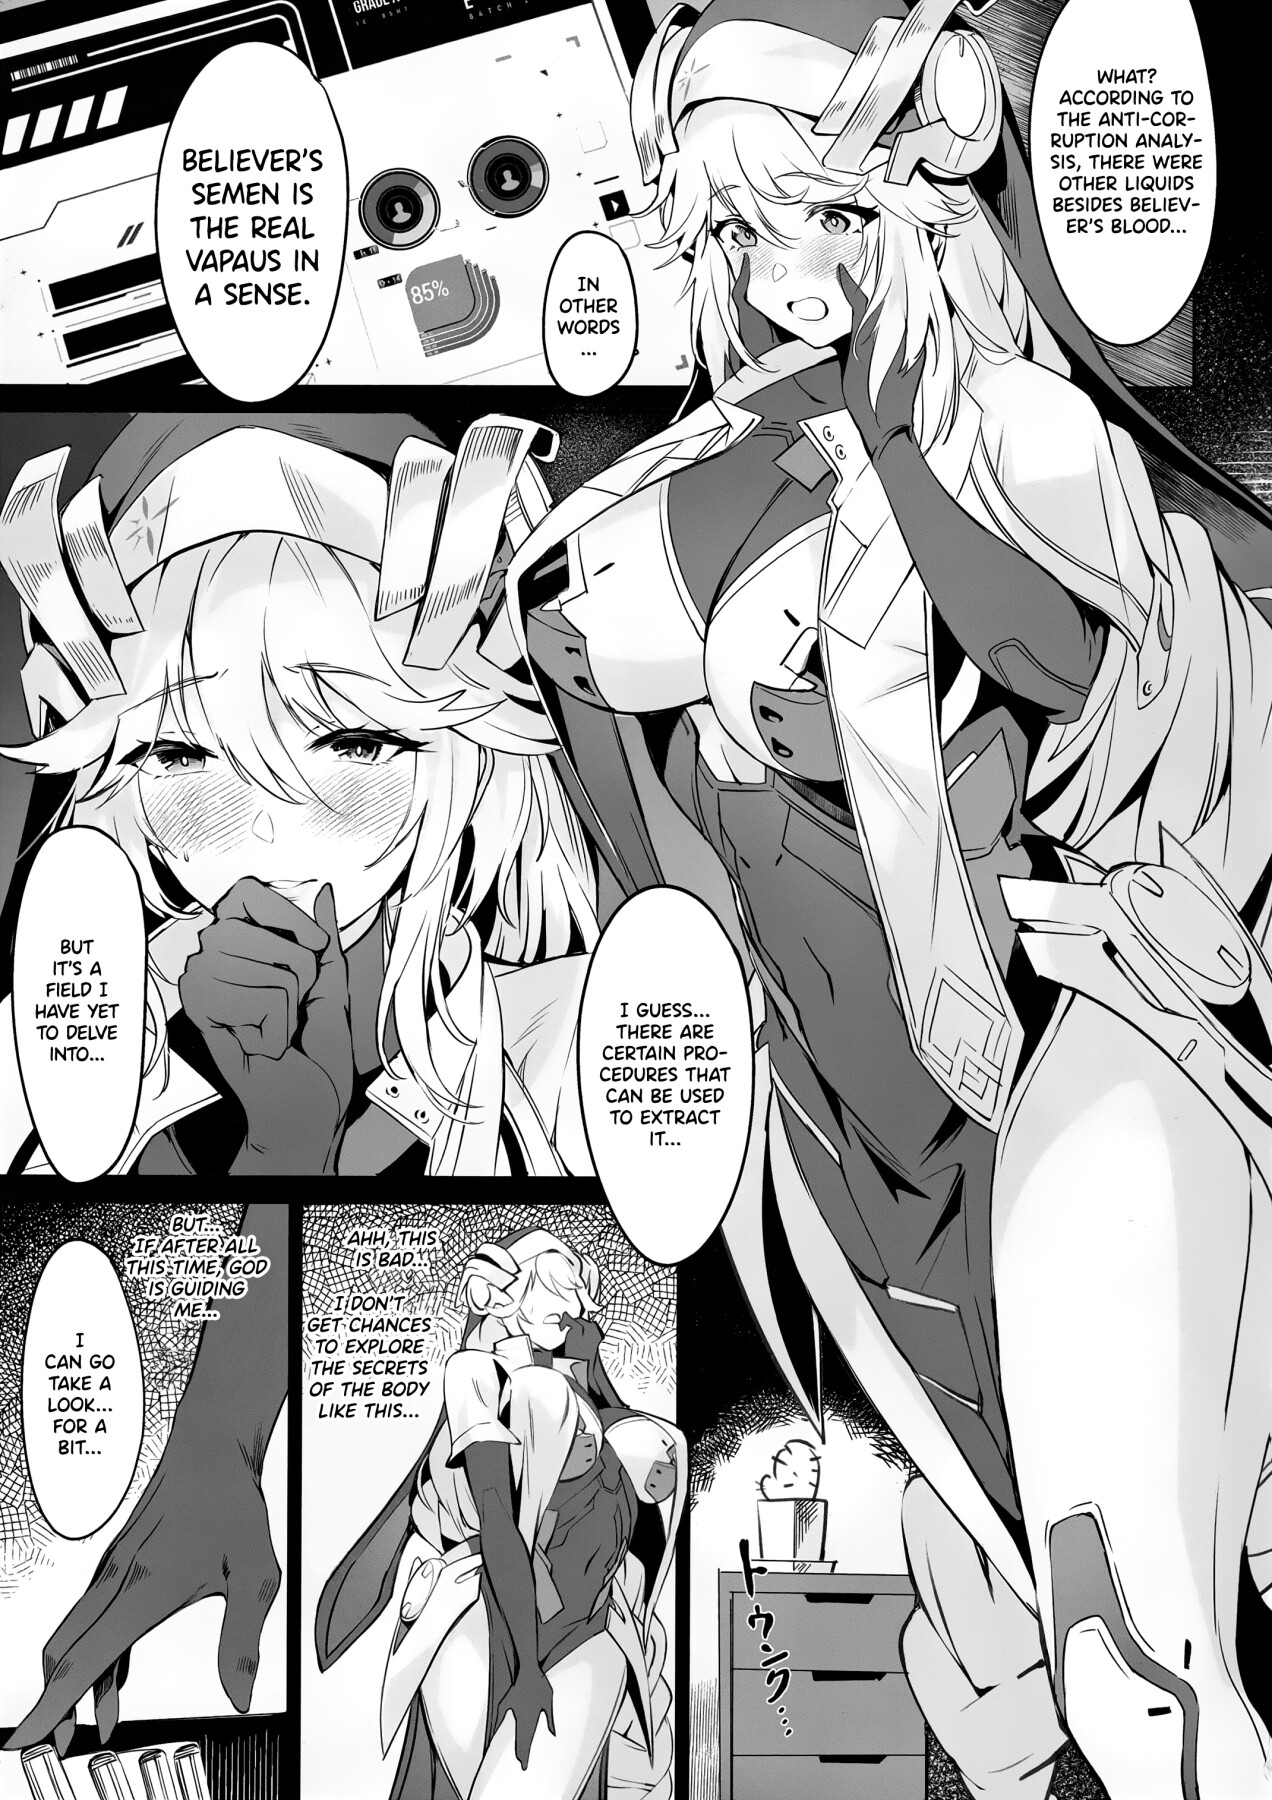 Hentai Manga Comic-Meeting with the Commander: Rapunzel Episode-Read-2